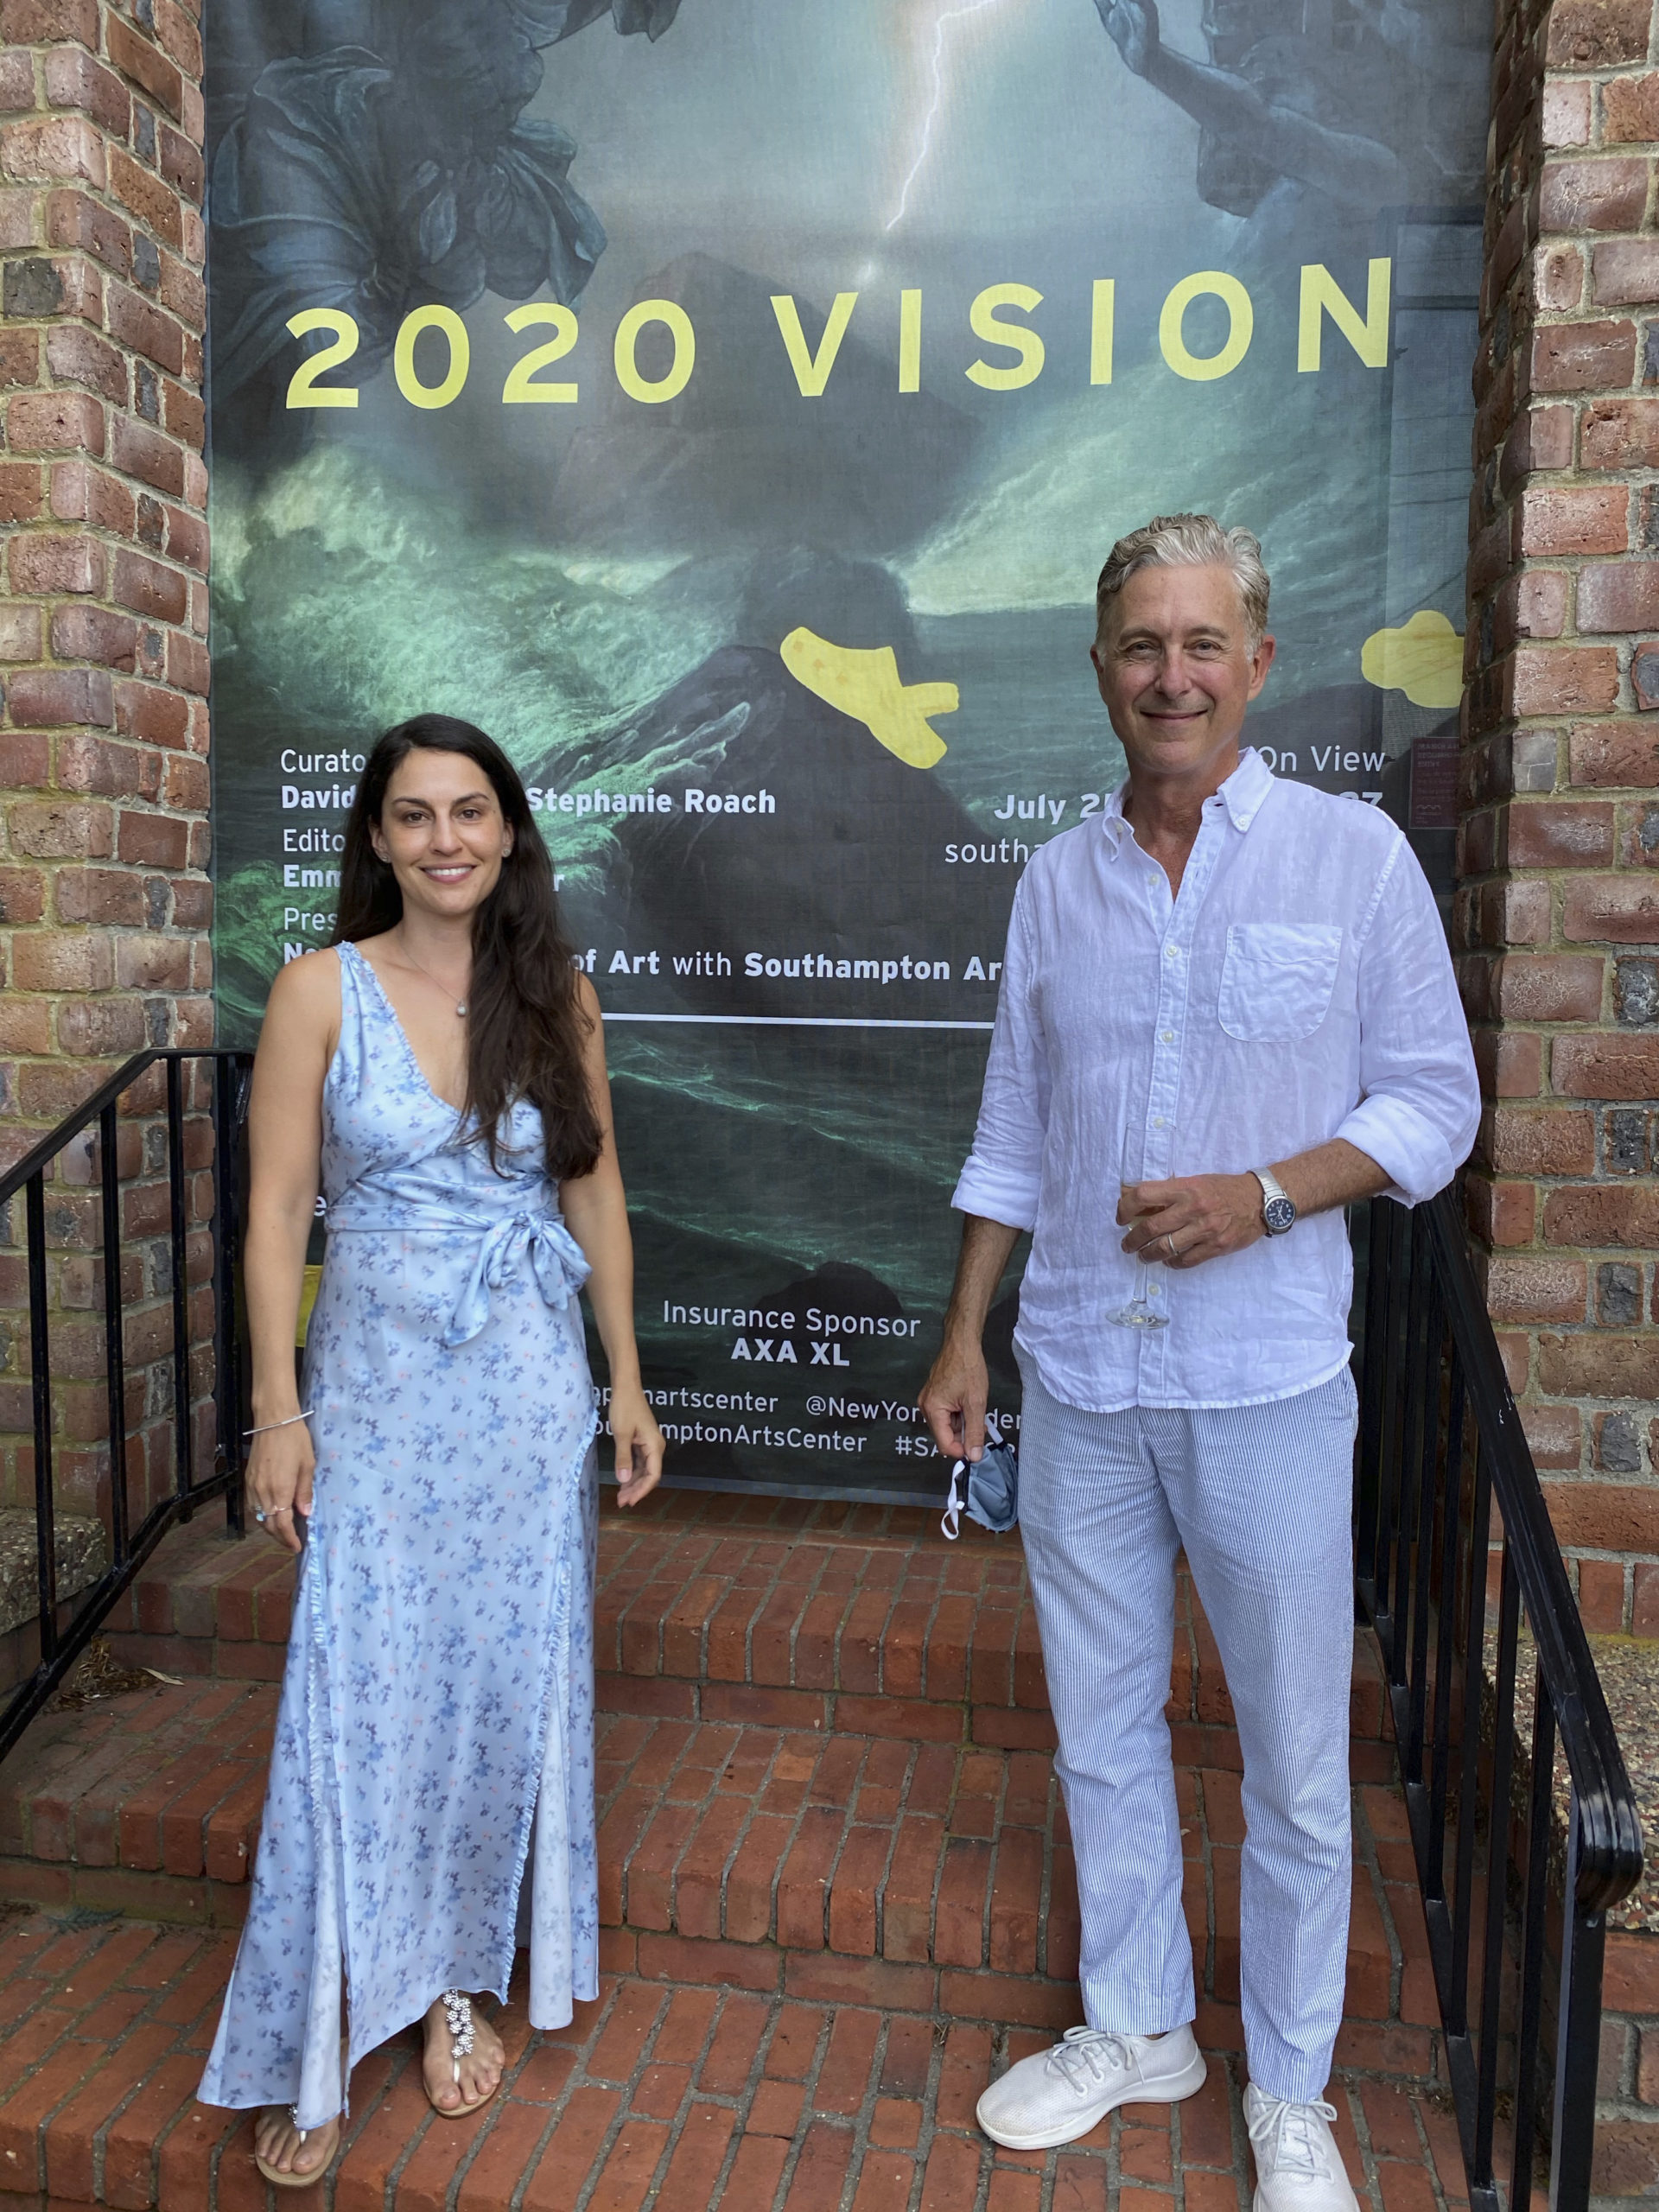 Stephanie Roach and David Kratz at the Southampton Arts Center 2020 Vision opening.